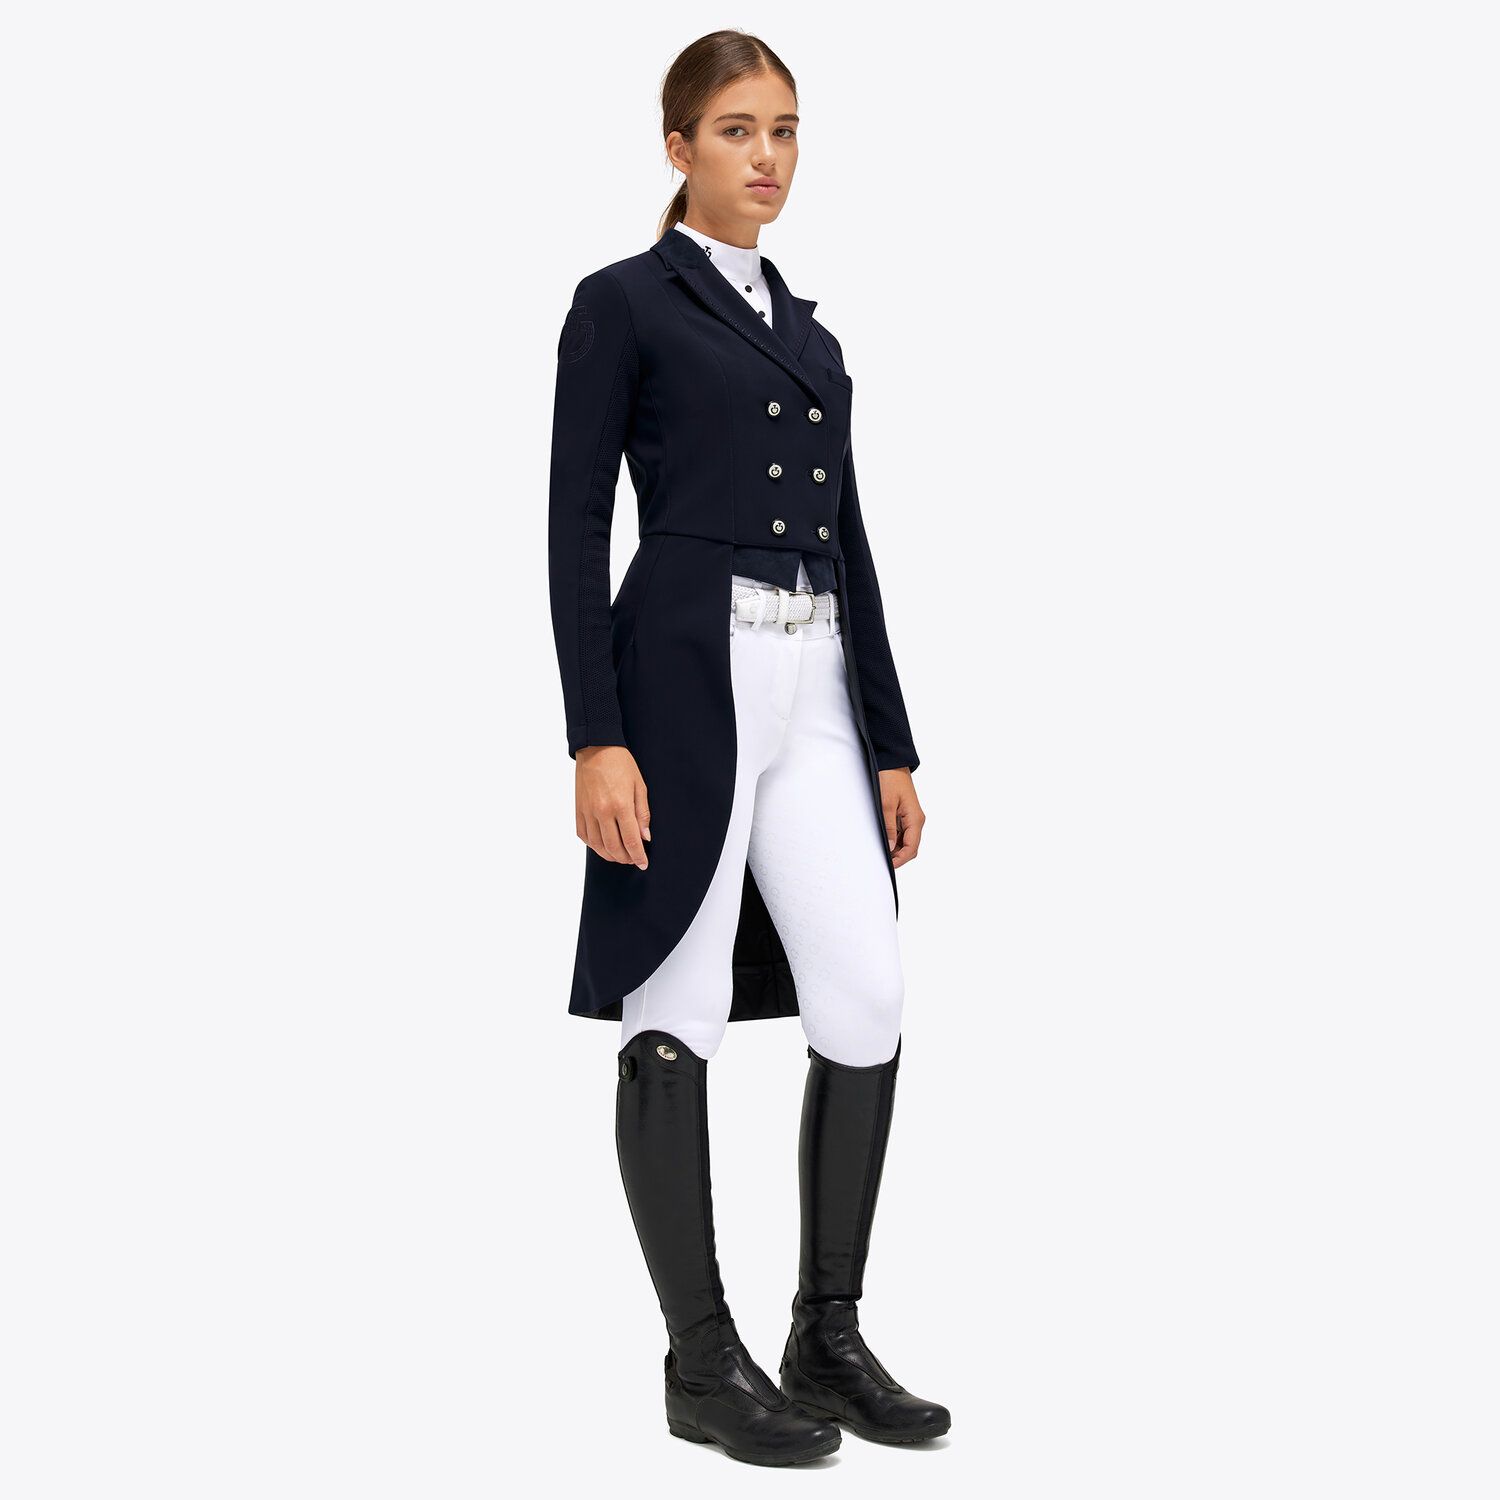 Cavalleria Toscana Women's tailcoat with covered b NAVY-2